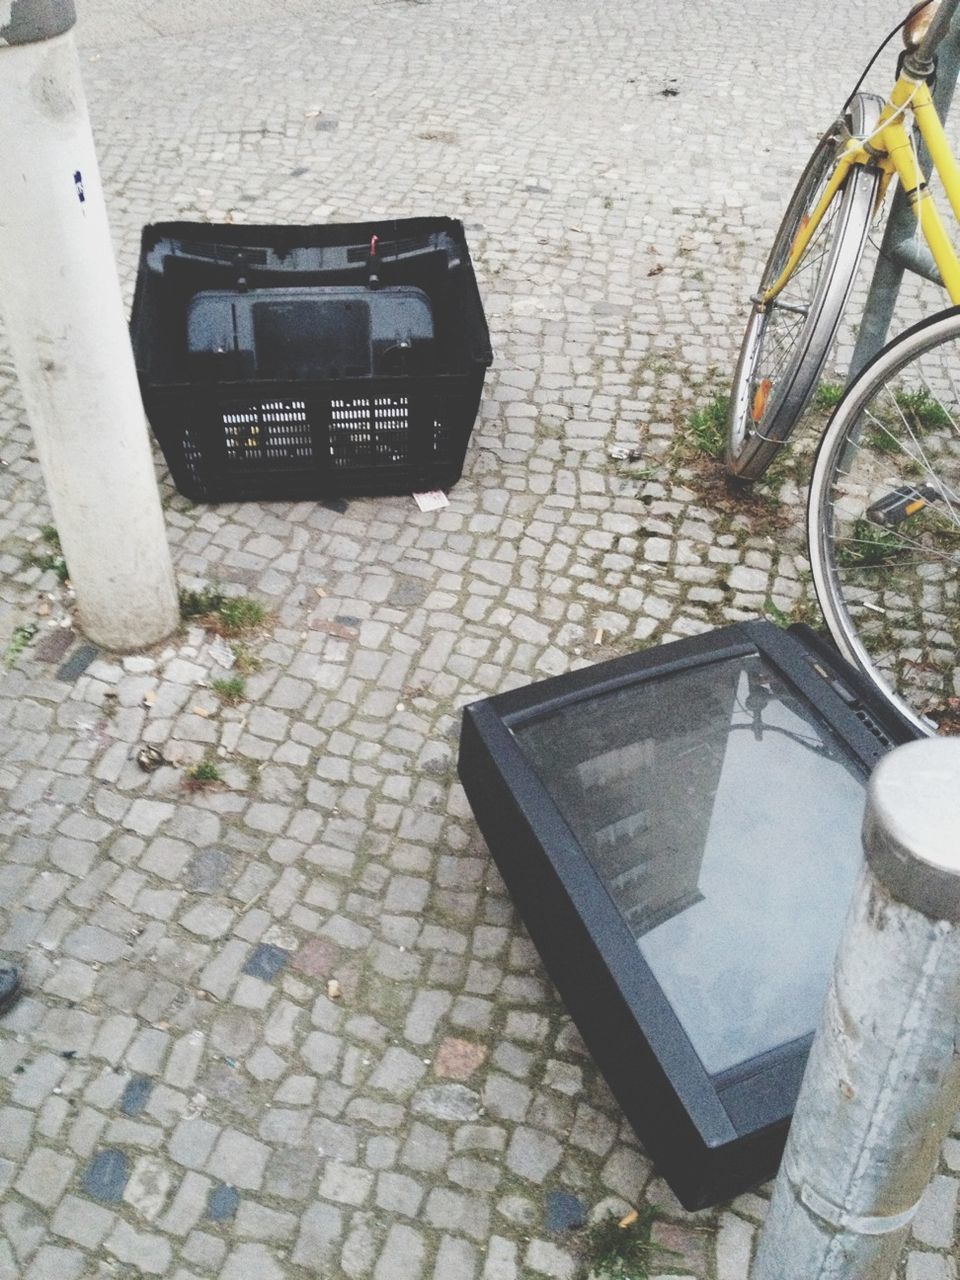 High angle view of television and basket on sidewalk